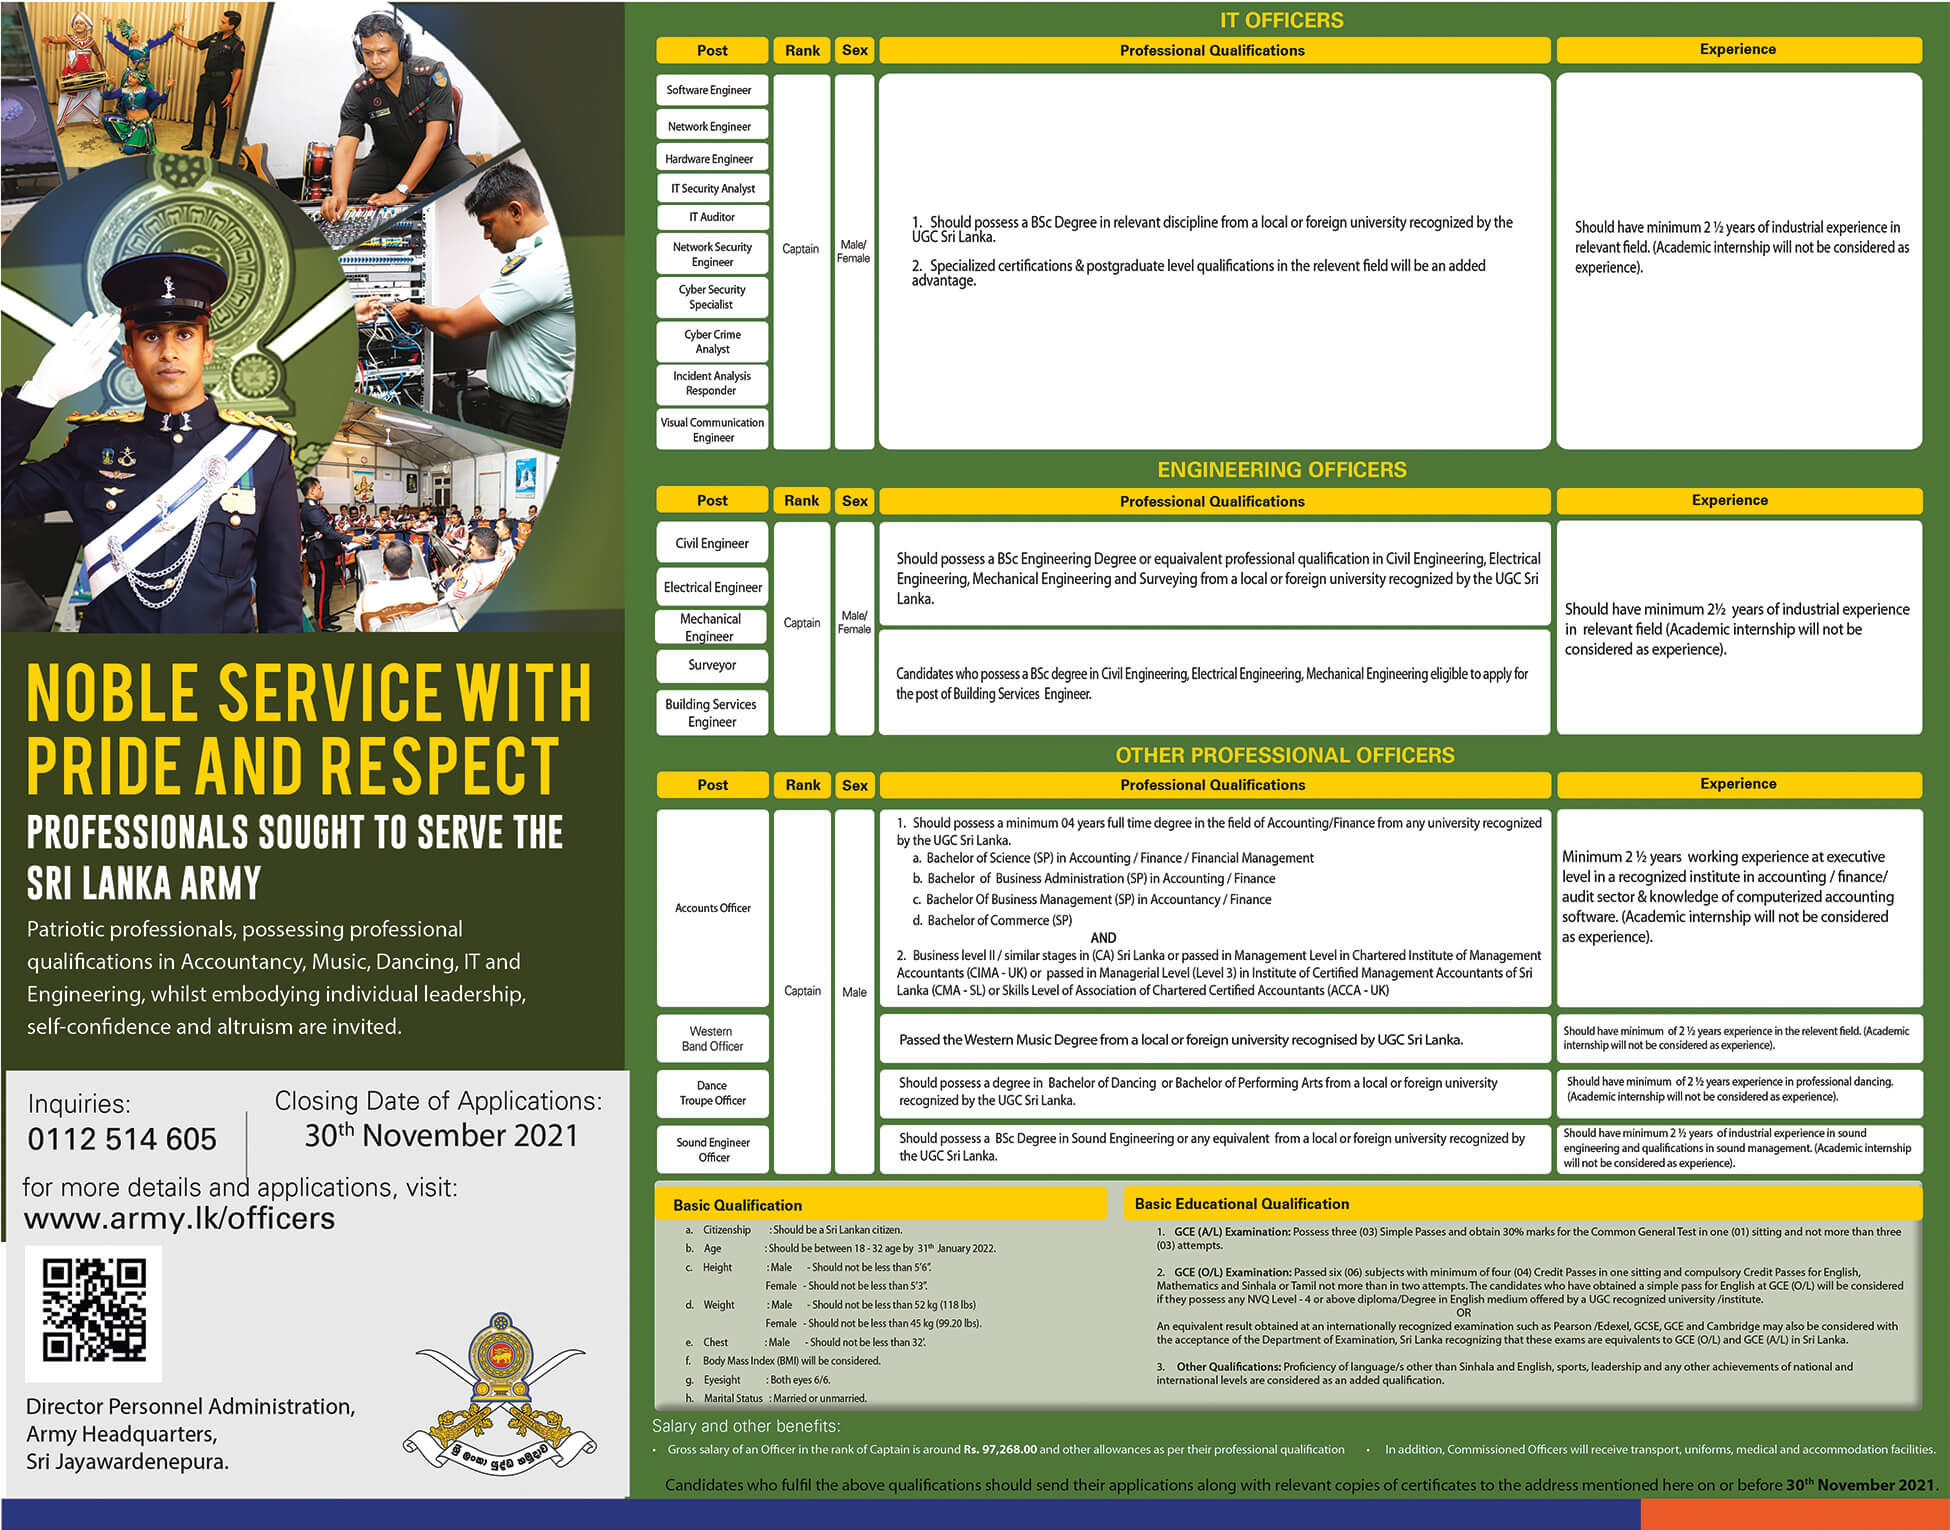 IT Officer, Engineering Officer, Other Professional Officer - Sri Lanka Army English